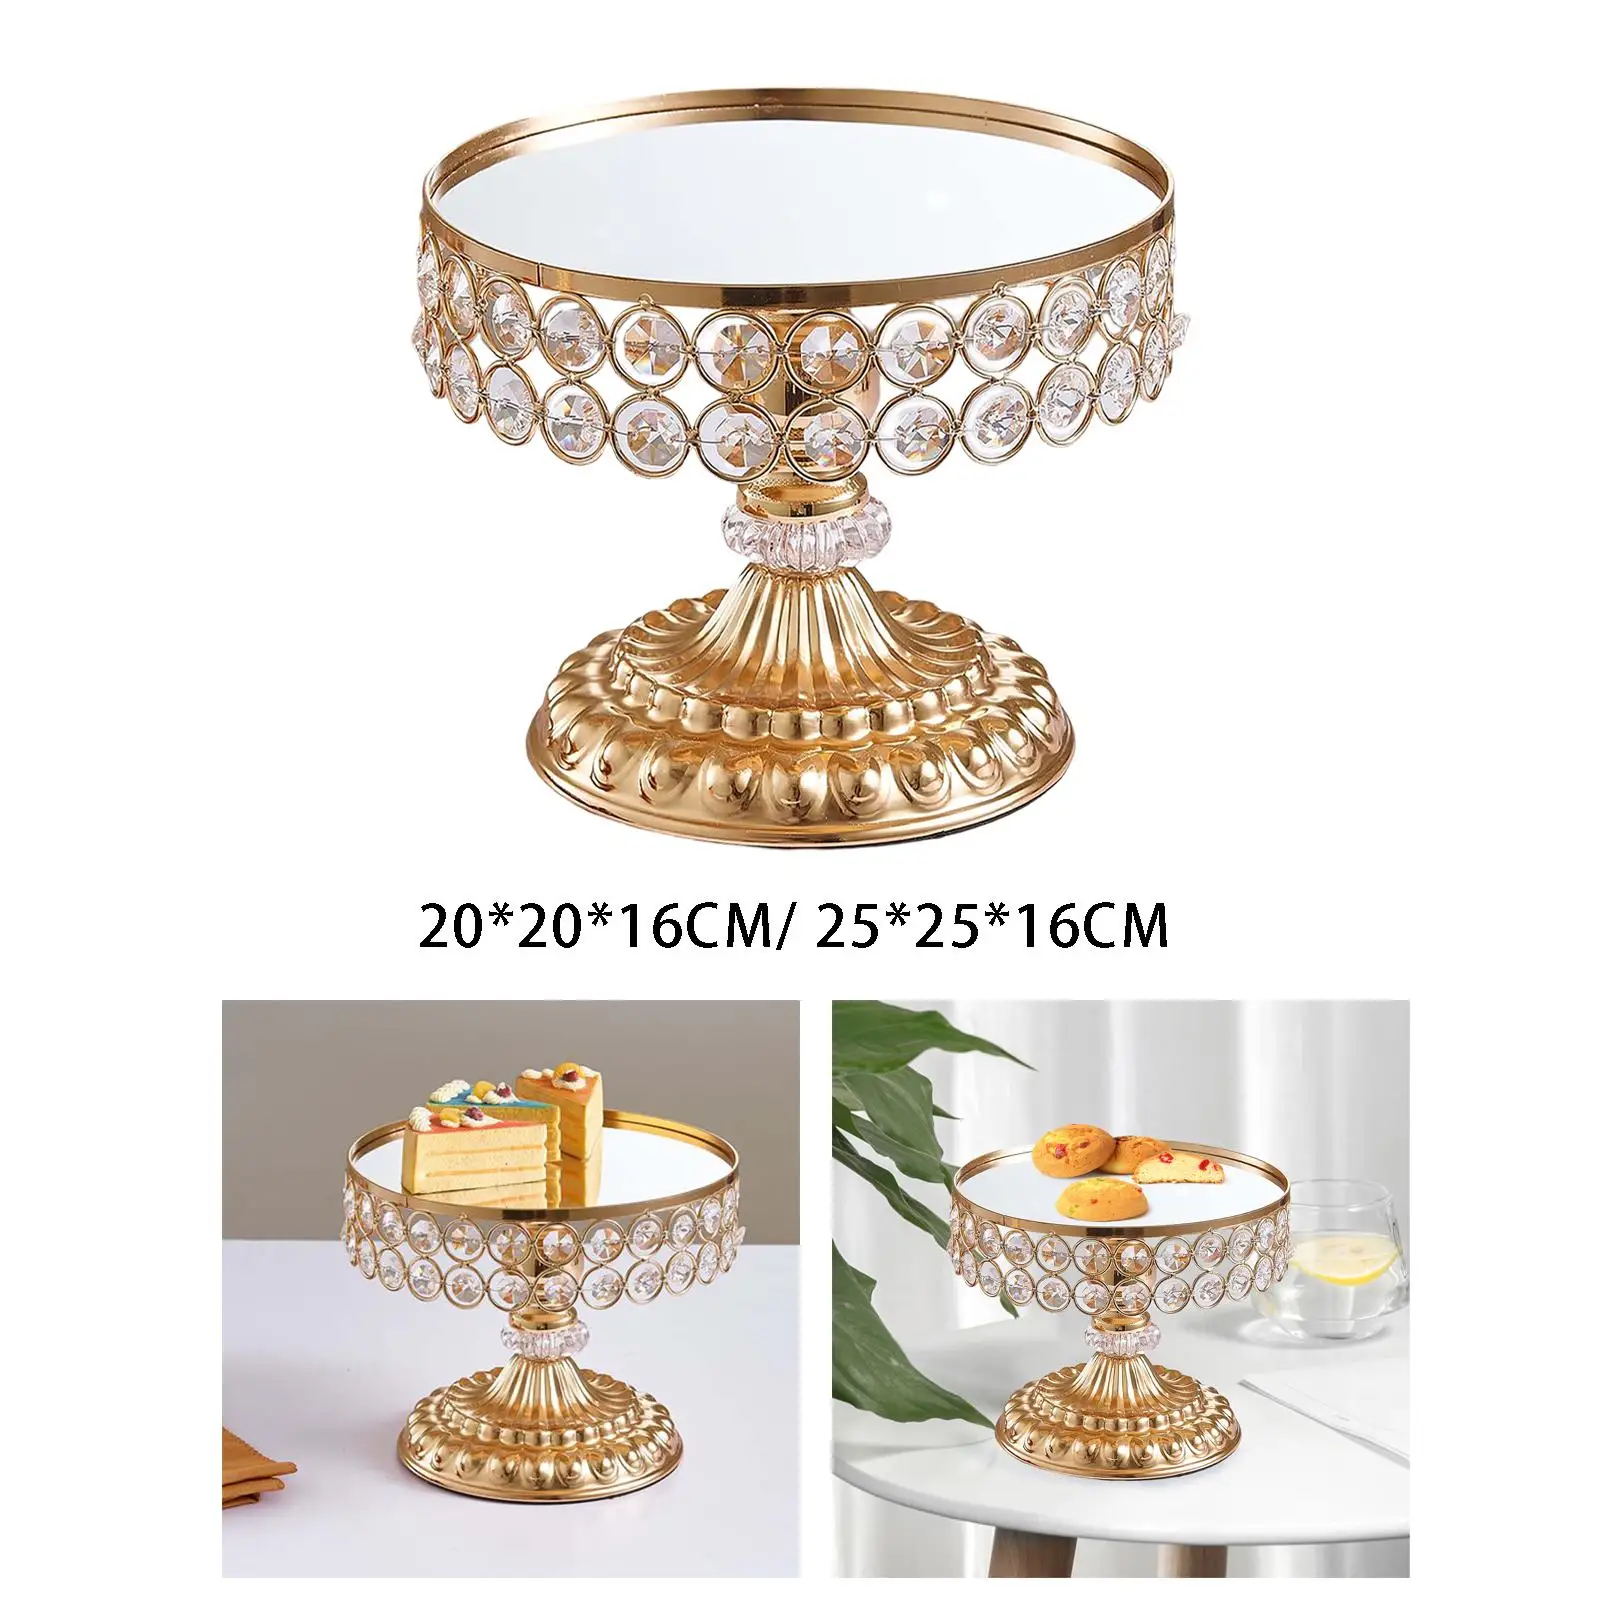 Cake Stand Cookie Pastry Display Stand Cake Pedestal Dessert Cupcake Display Tray for Anniversaries Graduation Ceremony